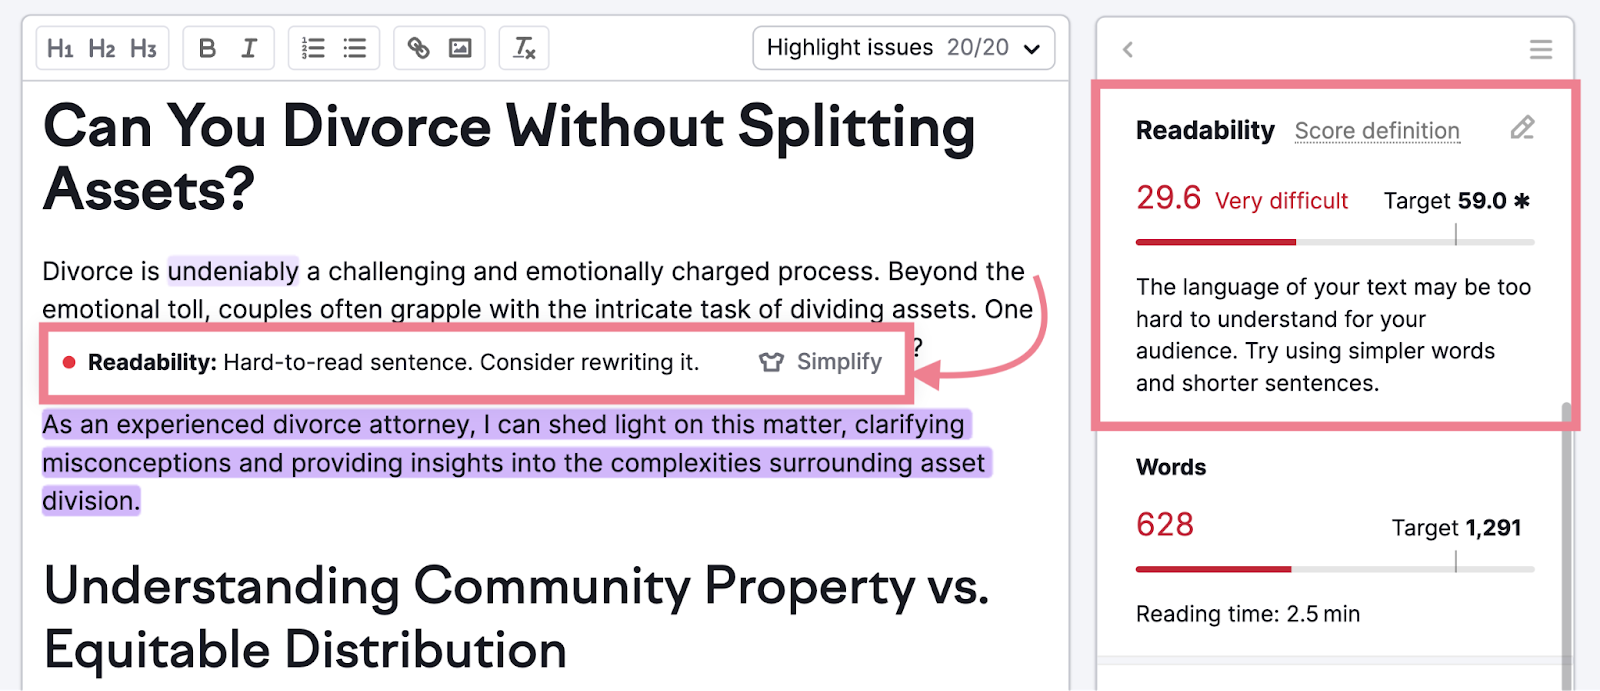 "Readability" issue highlighted in text and "Readability" score in the right-hand side of the screen in SEO Writing Assistant